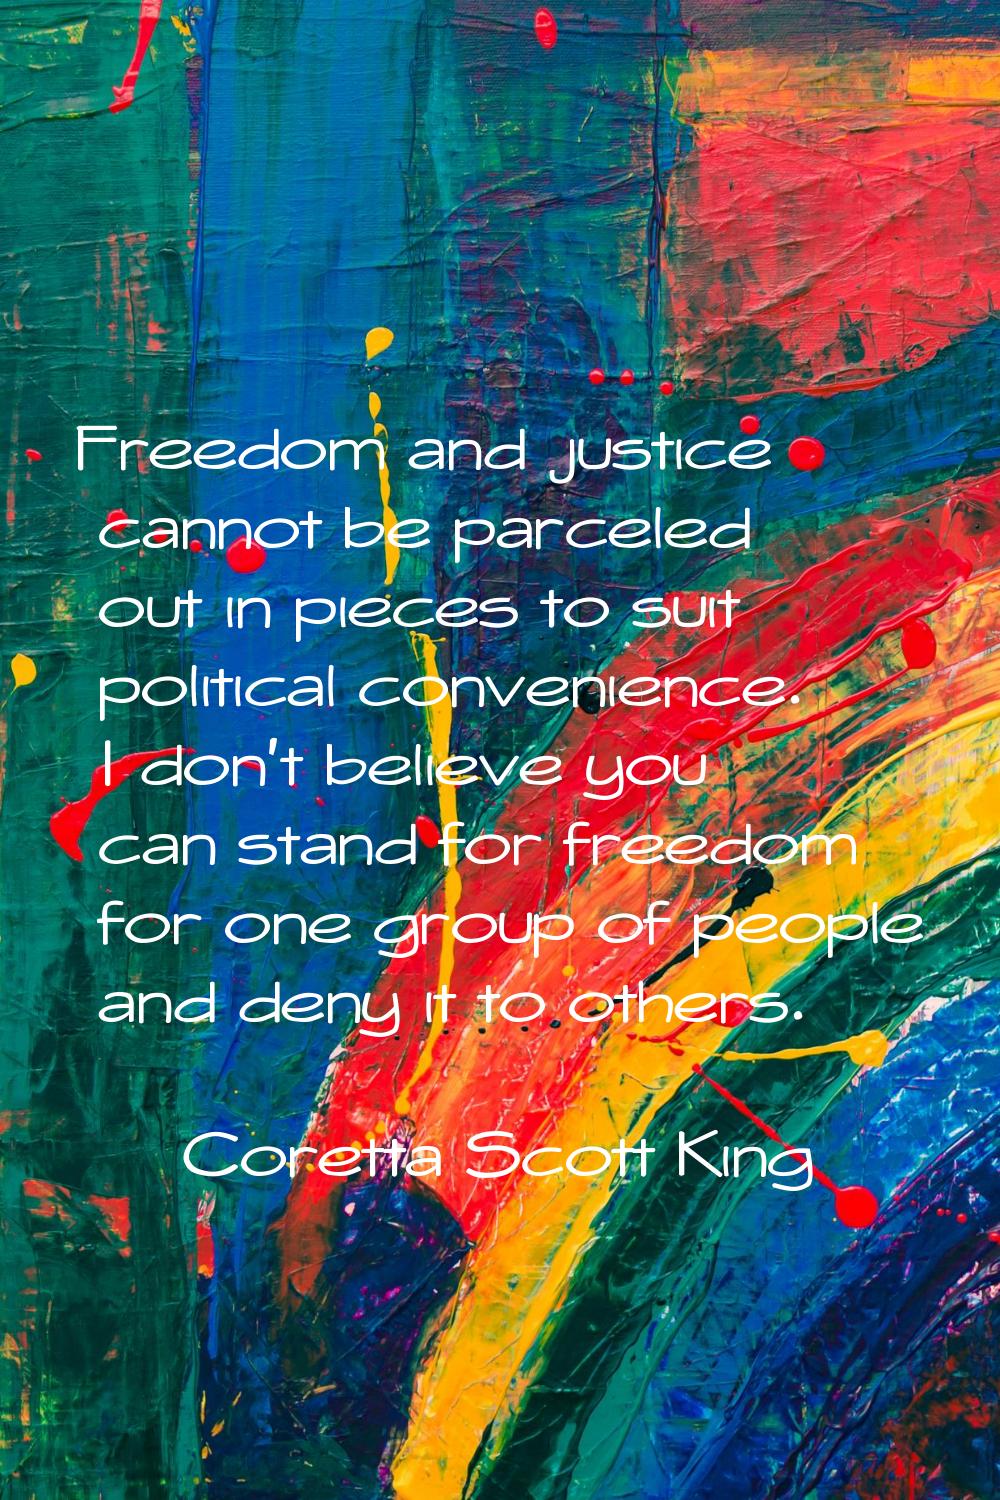 Freedom and justice cannot be parceled out in pieces to suit political convenience. I don't believe